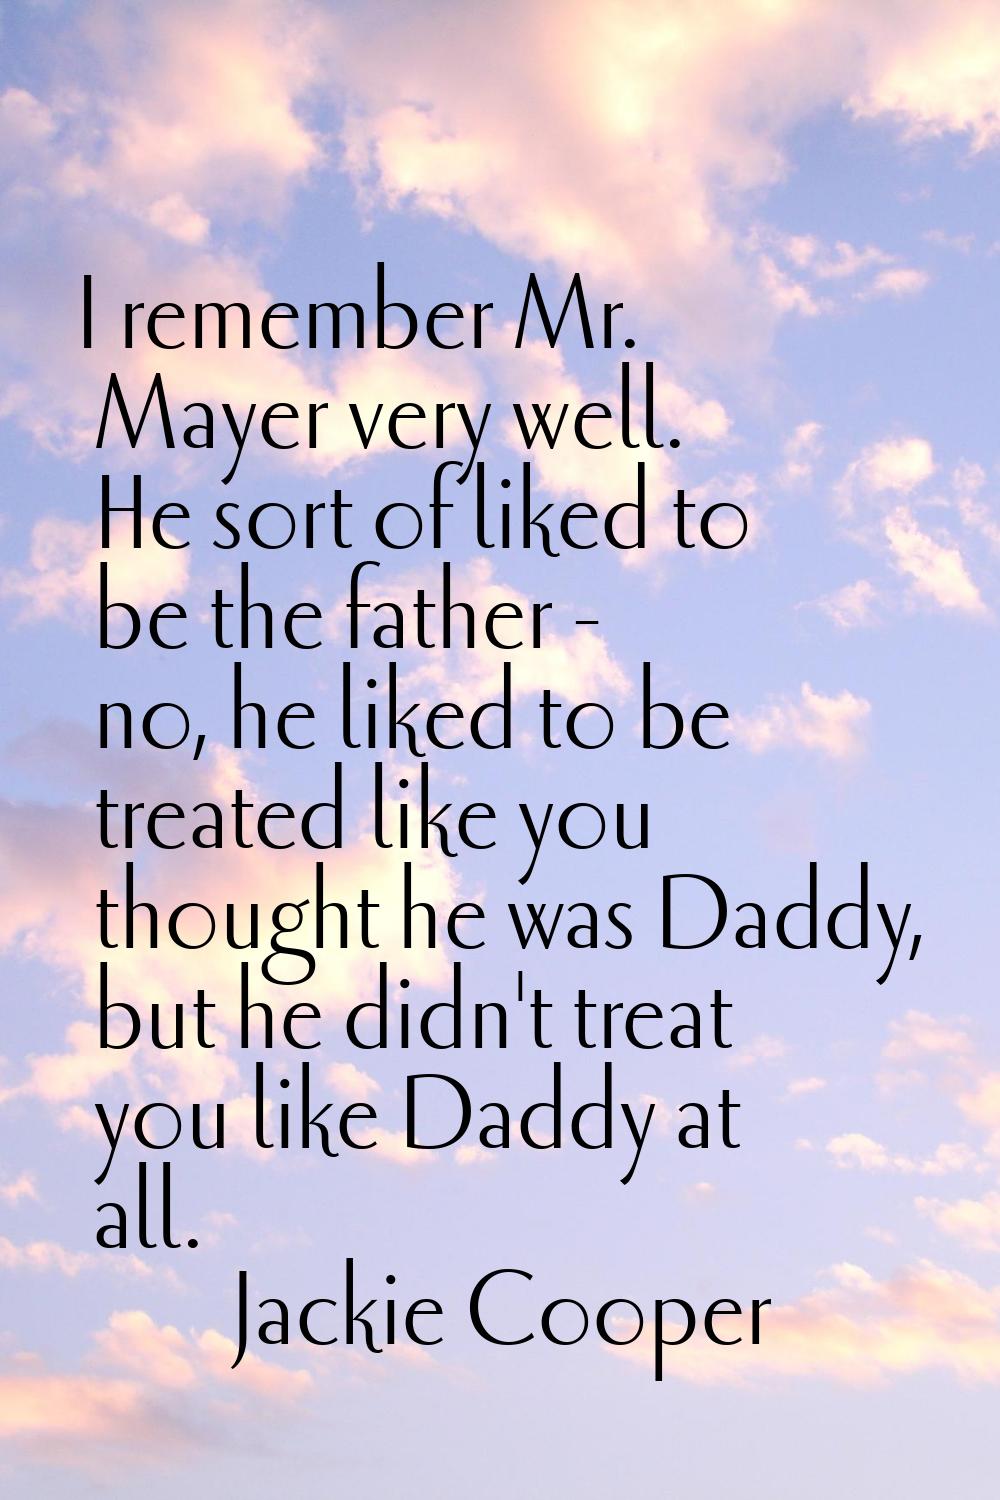 I remember Mr. Mayer very well. He sort of liked to be the father - no, he liked to be treated like